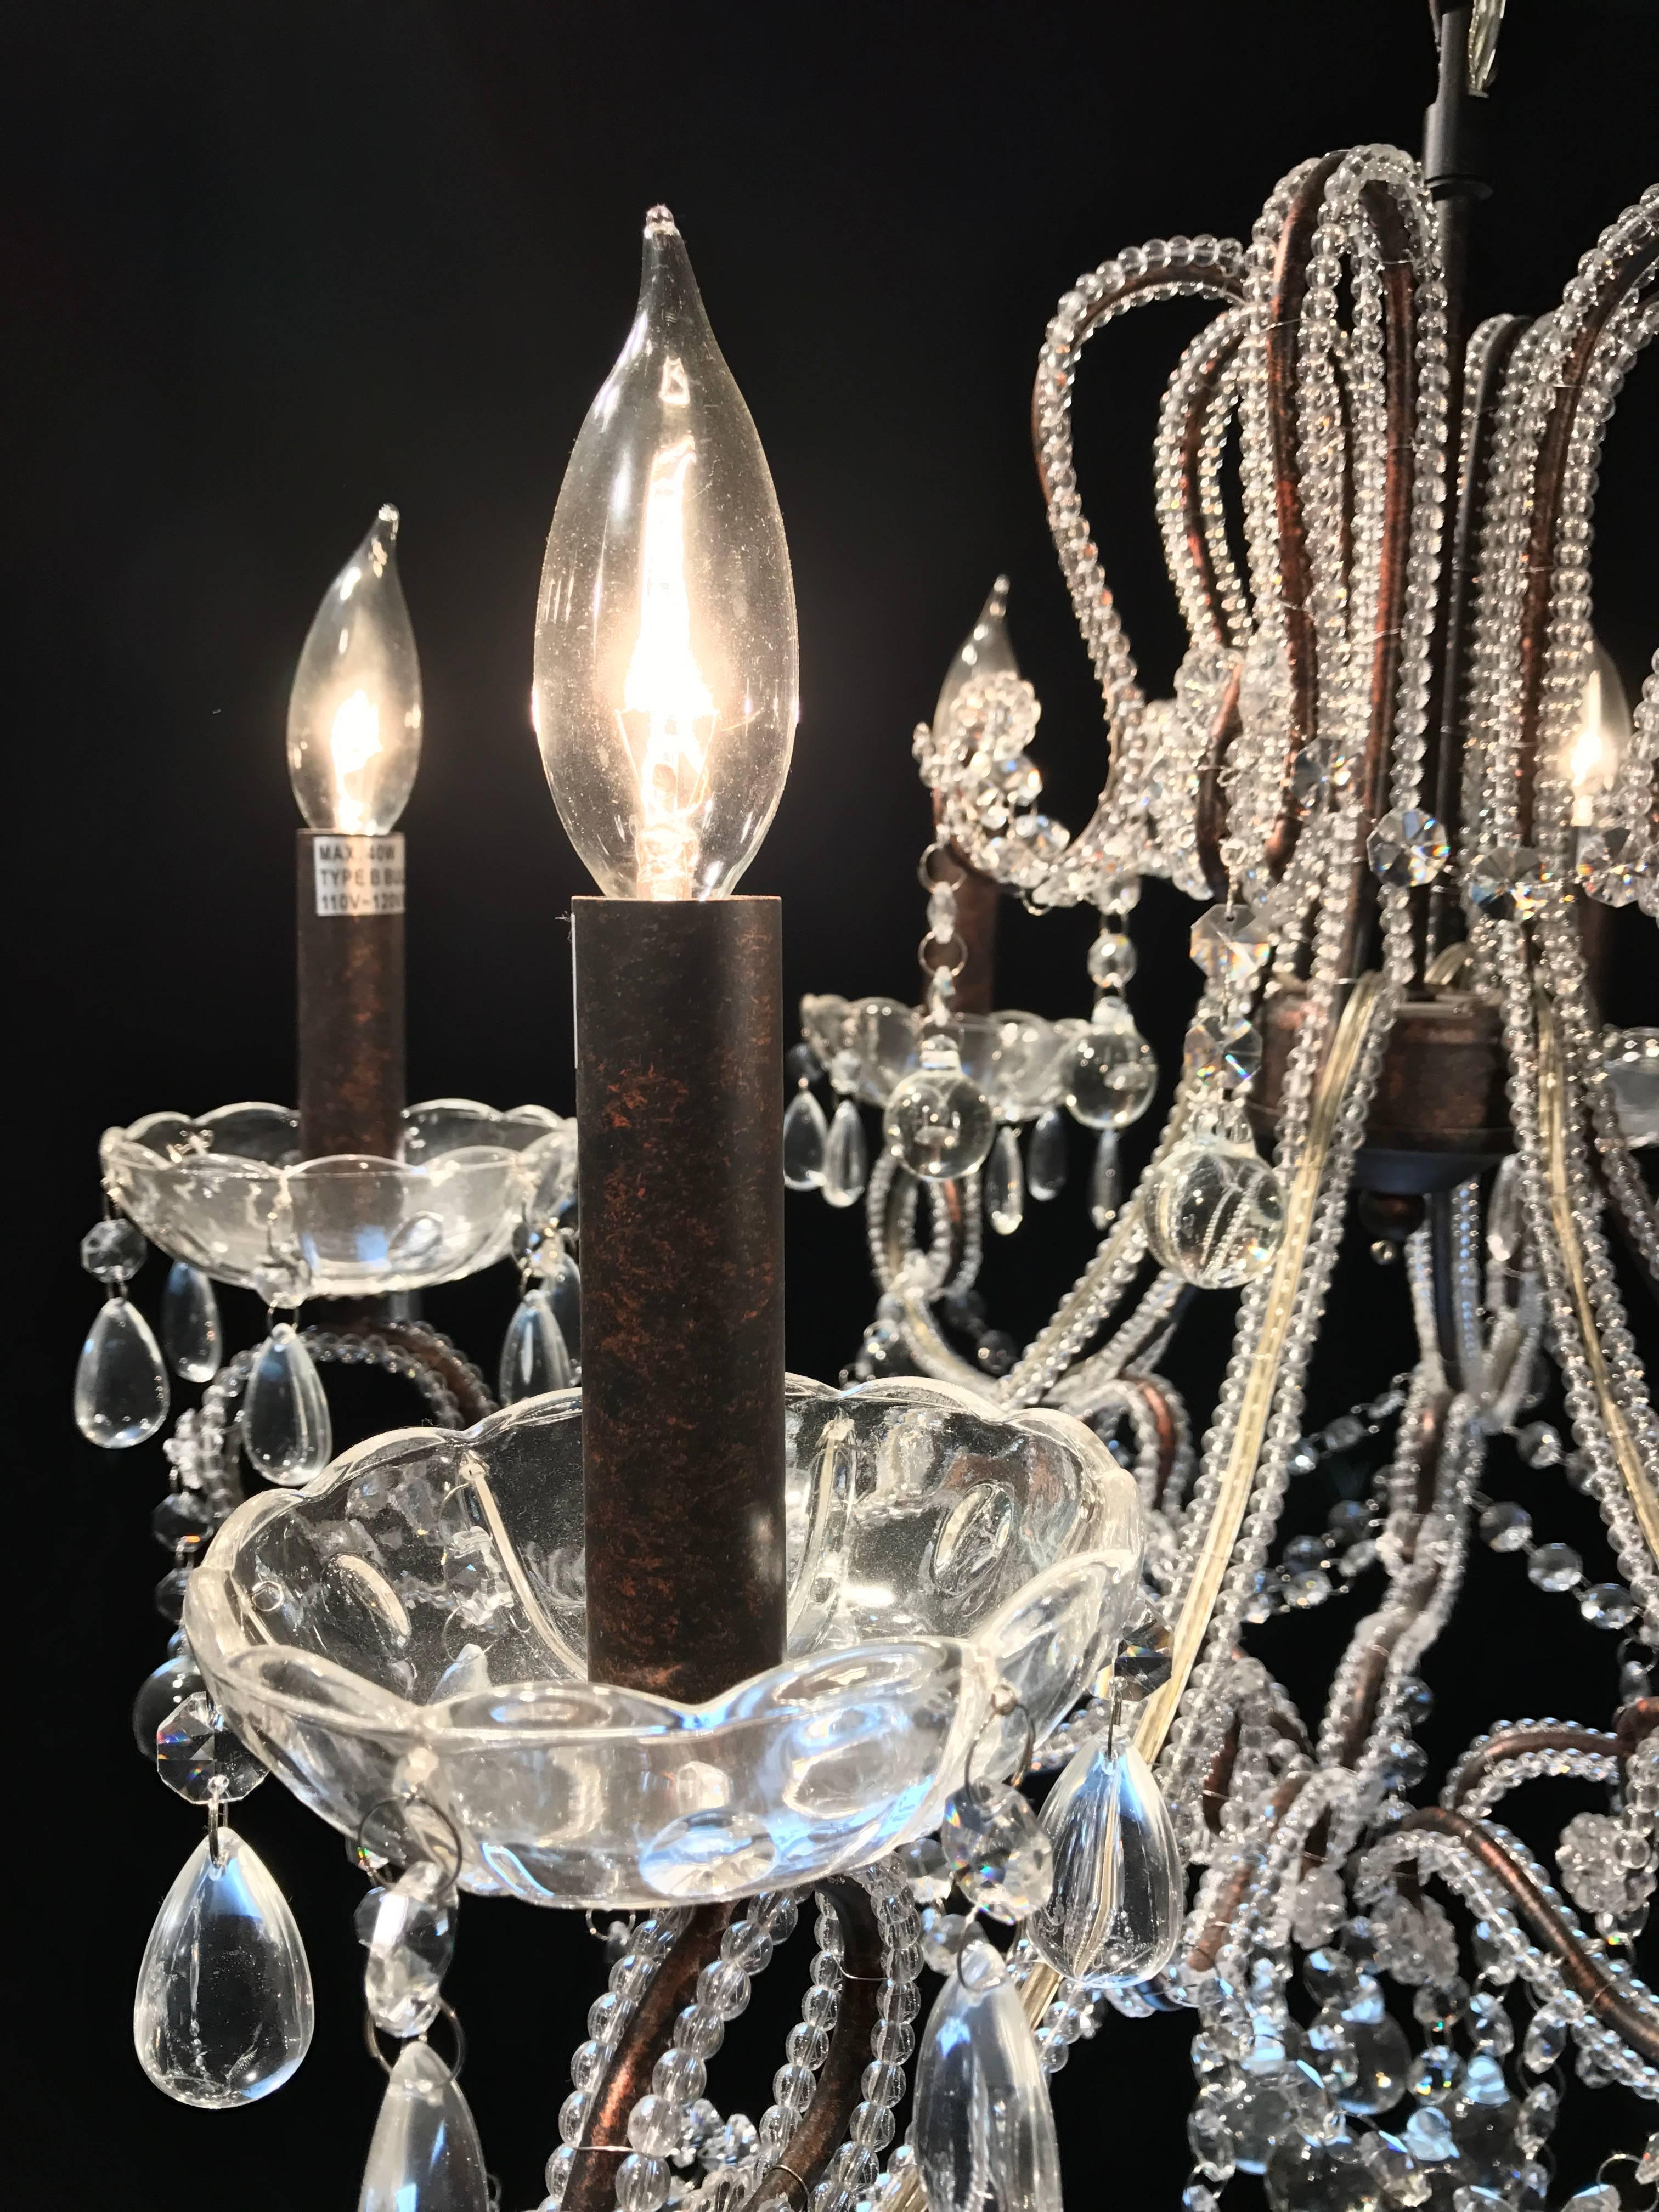 Lovely cut-glass six-arm chandelier festooned with beads from top to bottom and covering the gold colored wiring. Clear pear and glass ball prisms hang from the beading. Bronze sockets perch upon simple bobeches also festooned with hanging teardrop